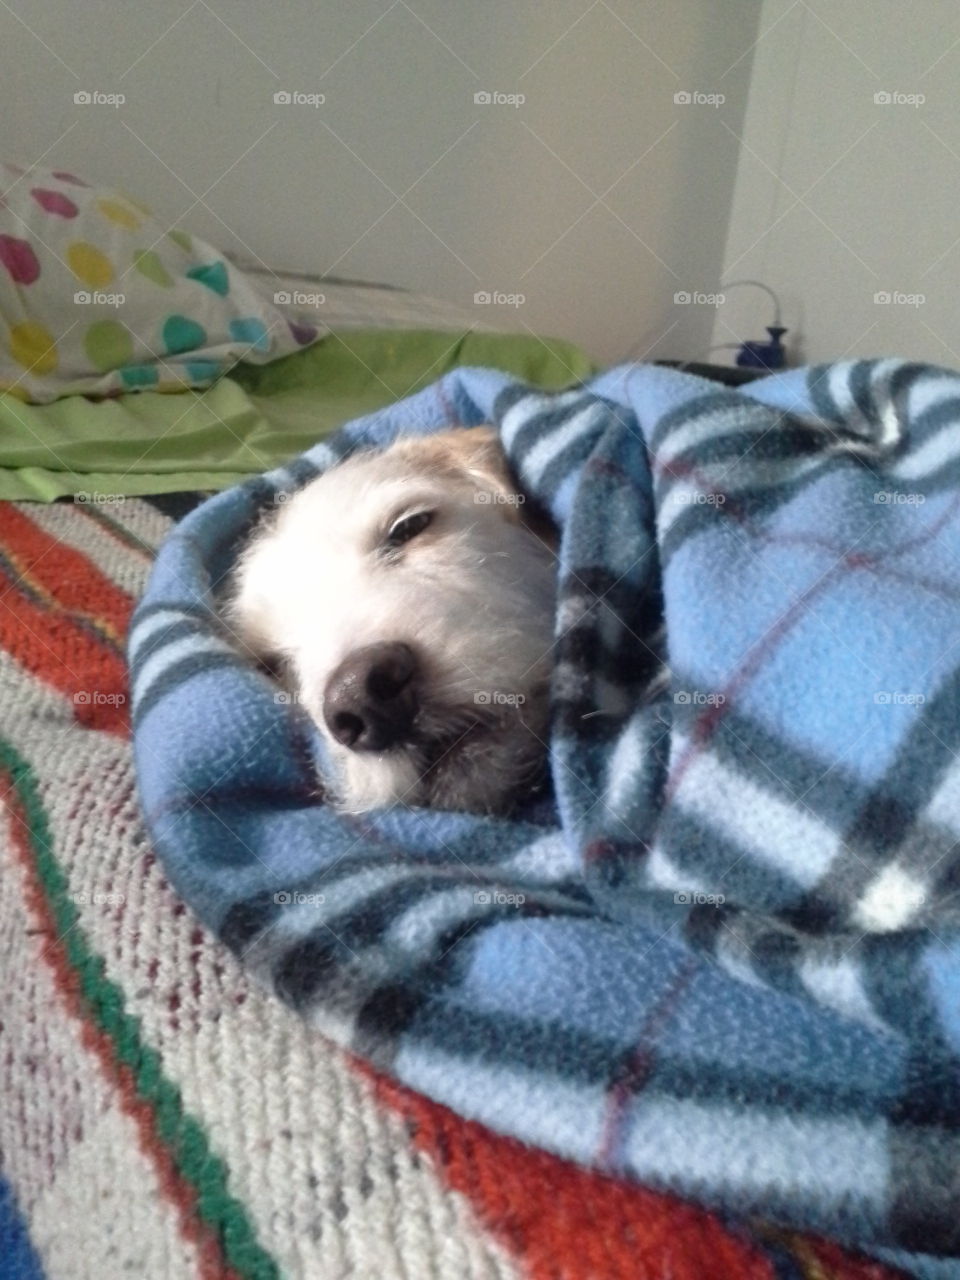 hey! remember i'm not a dog, i'm a burrito. he was so bas because de day was to cold so y put a blanket in the bed and roll him like a mexican burrito